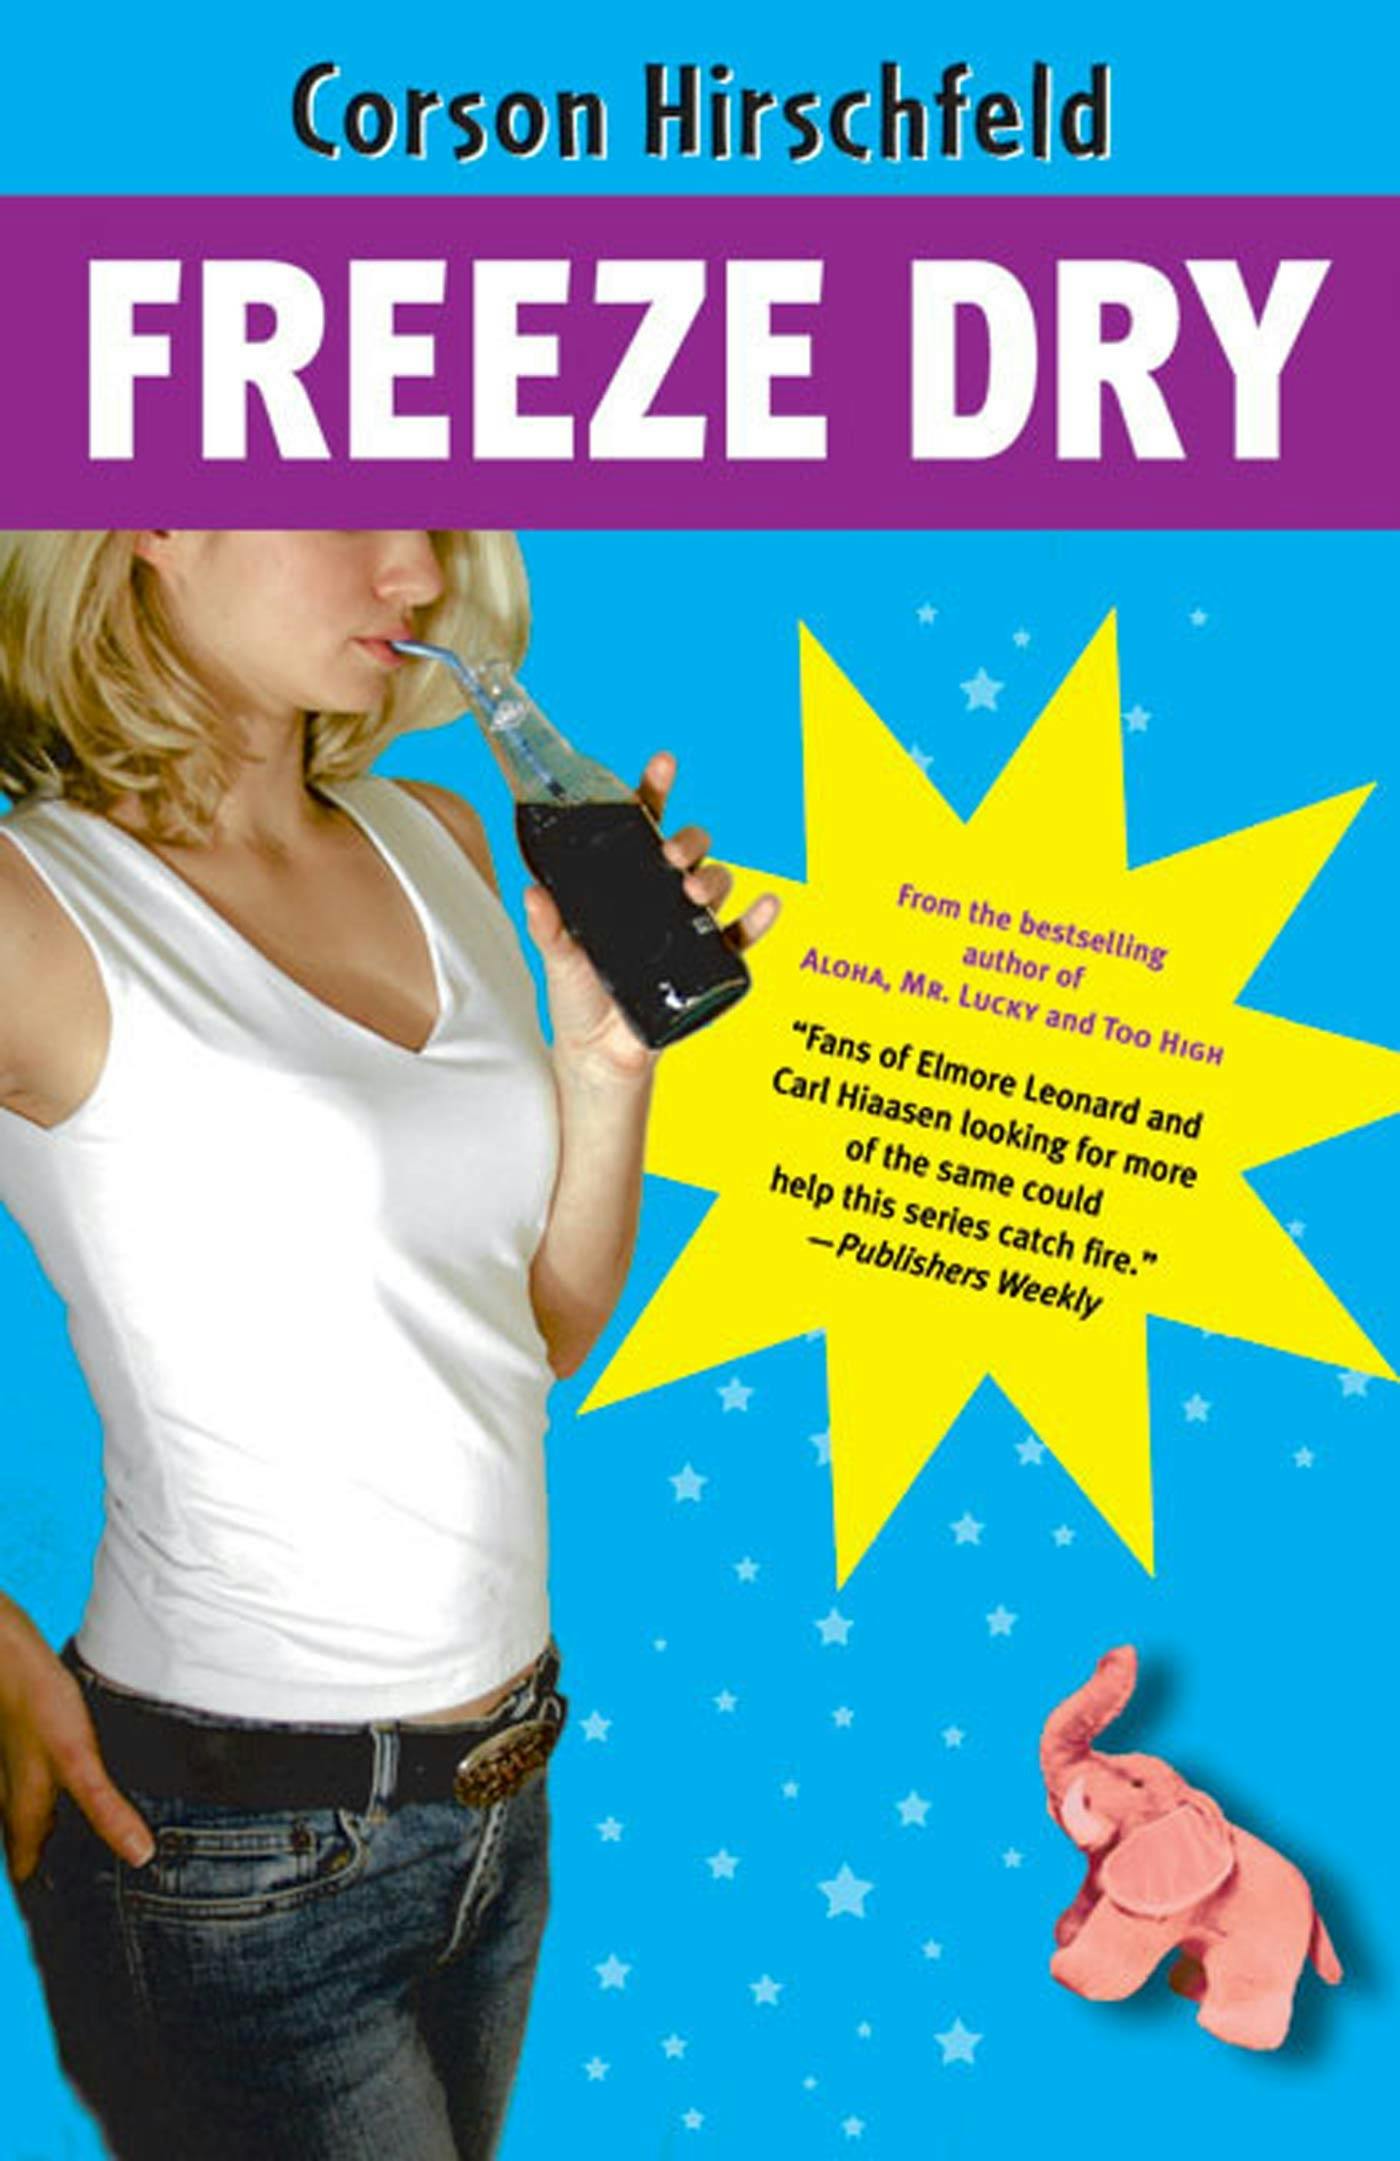 Cover for the book titled as: Freeze Dry